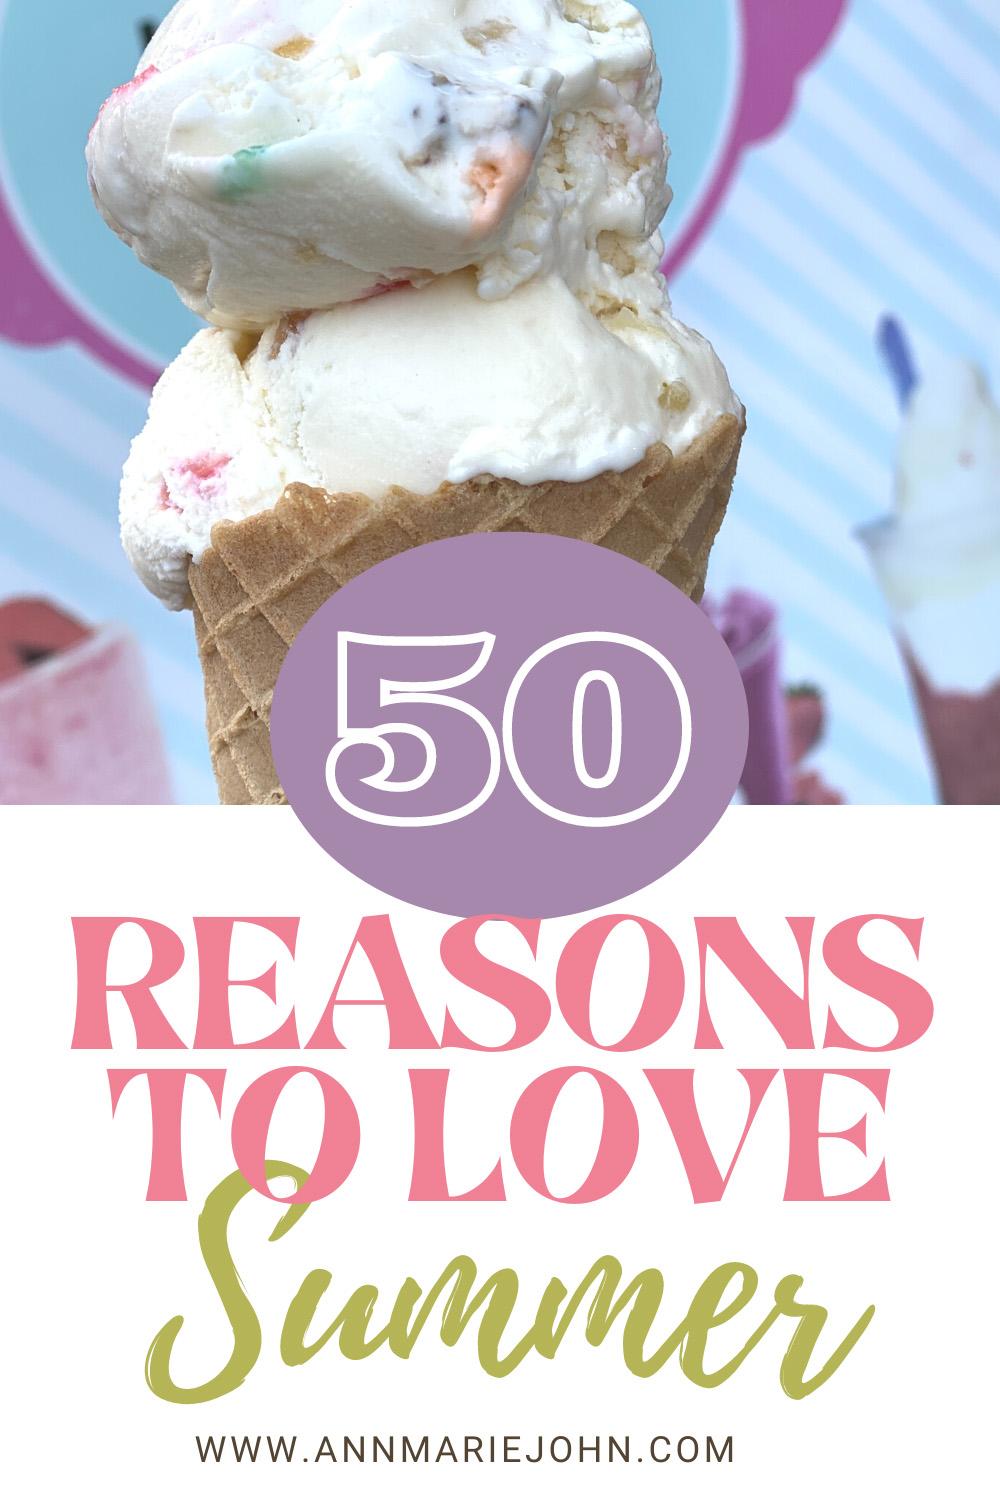 50 Reasons to Love Summer